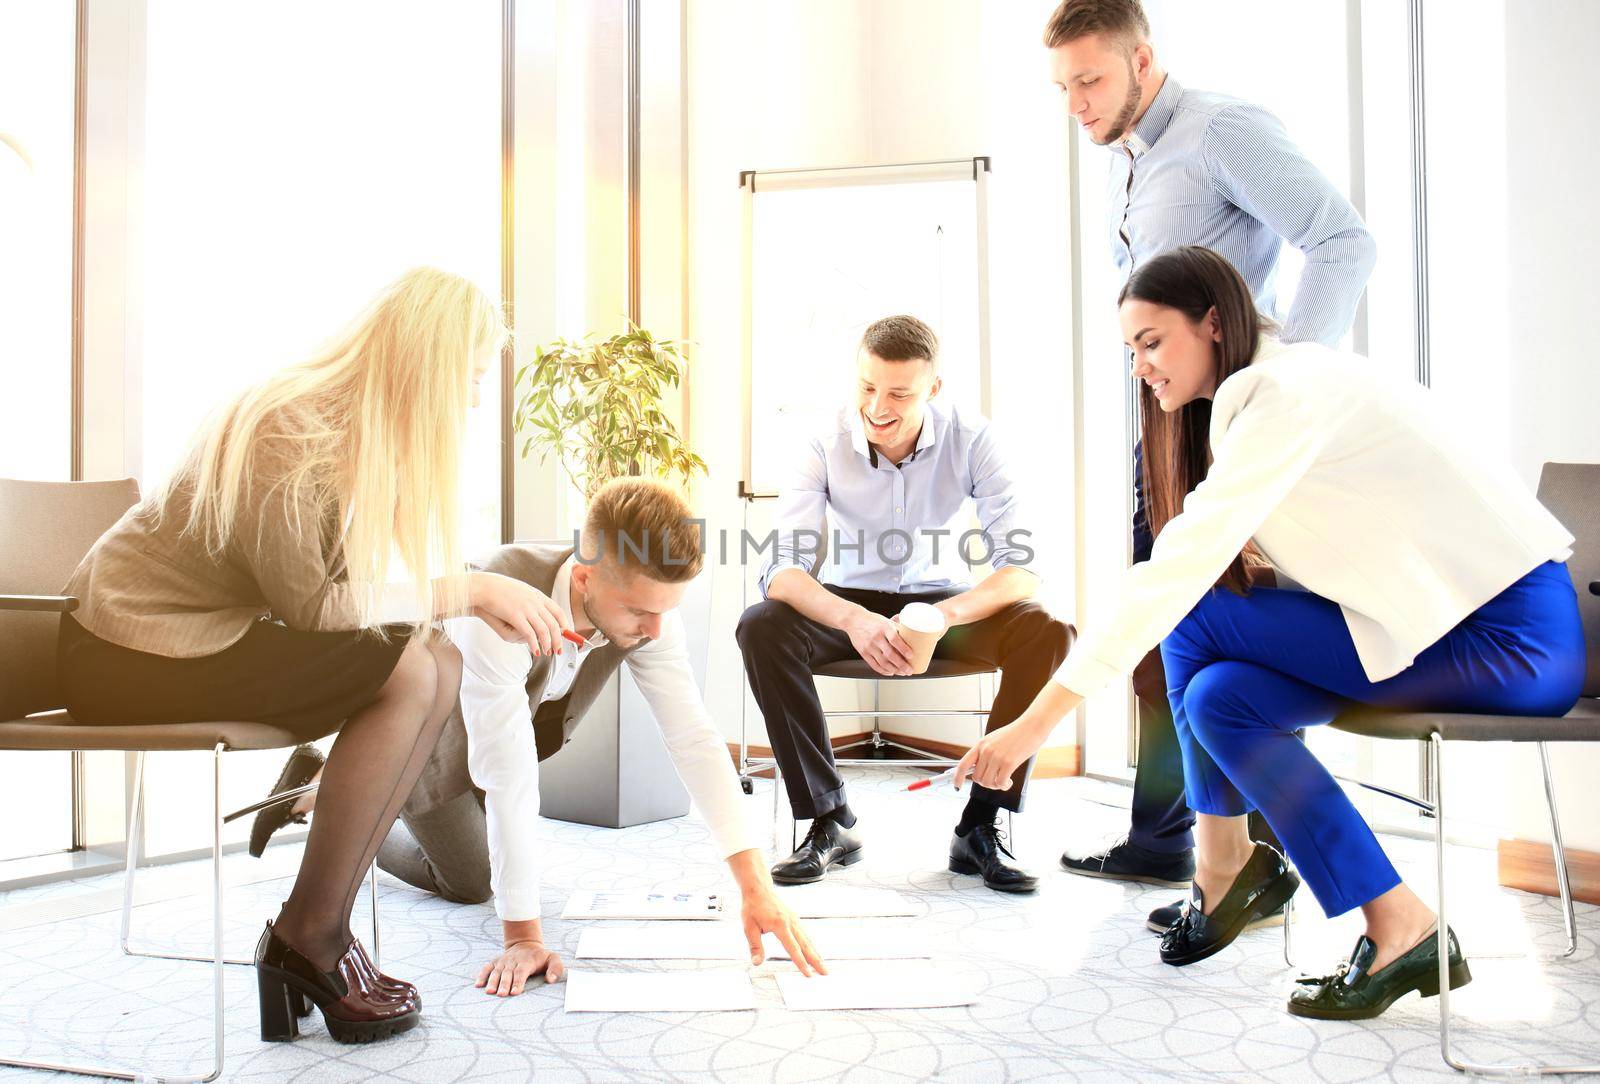 Creative people looking at project plan laid out on floor. Business associates discussing project plan in modern office.